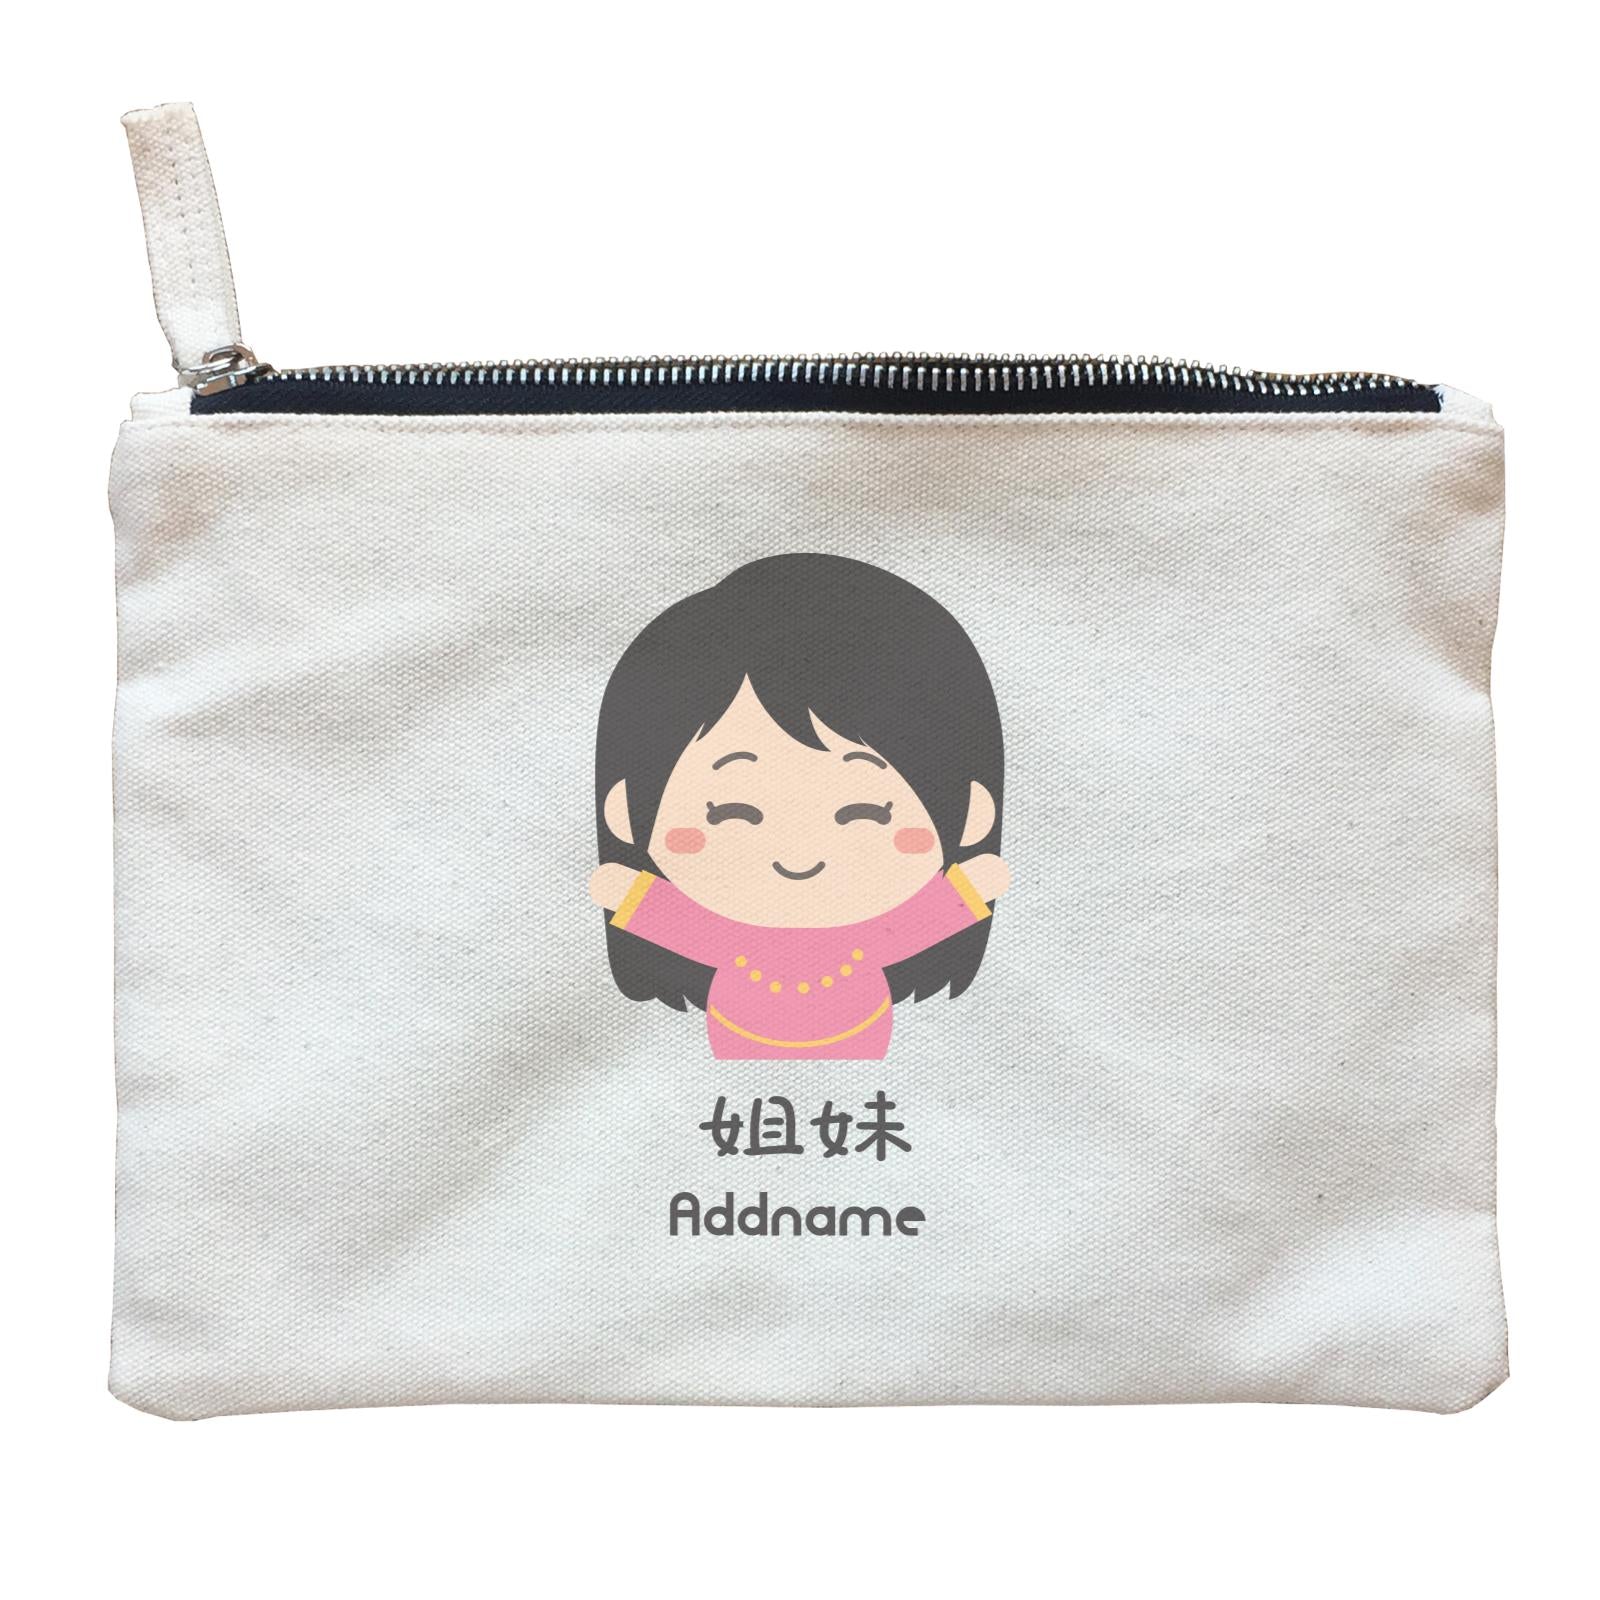 Wedding Couple Eastern Cute Happy Bridesmaid Addname Zipper Pouch